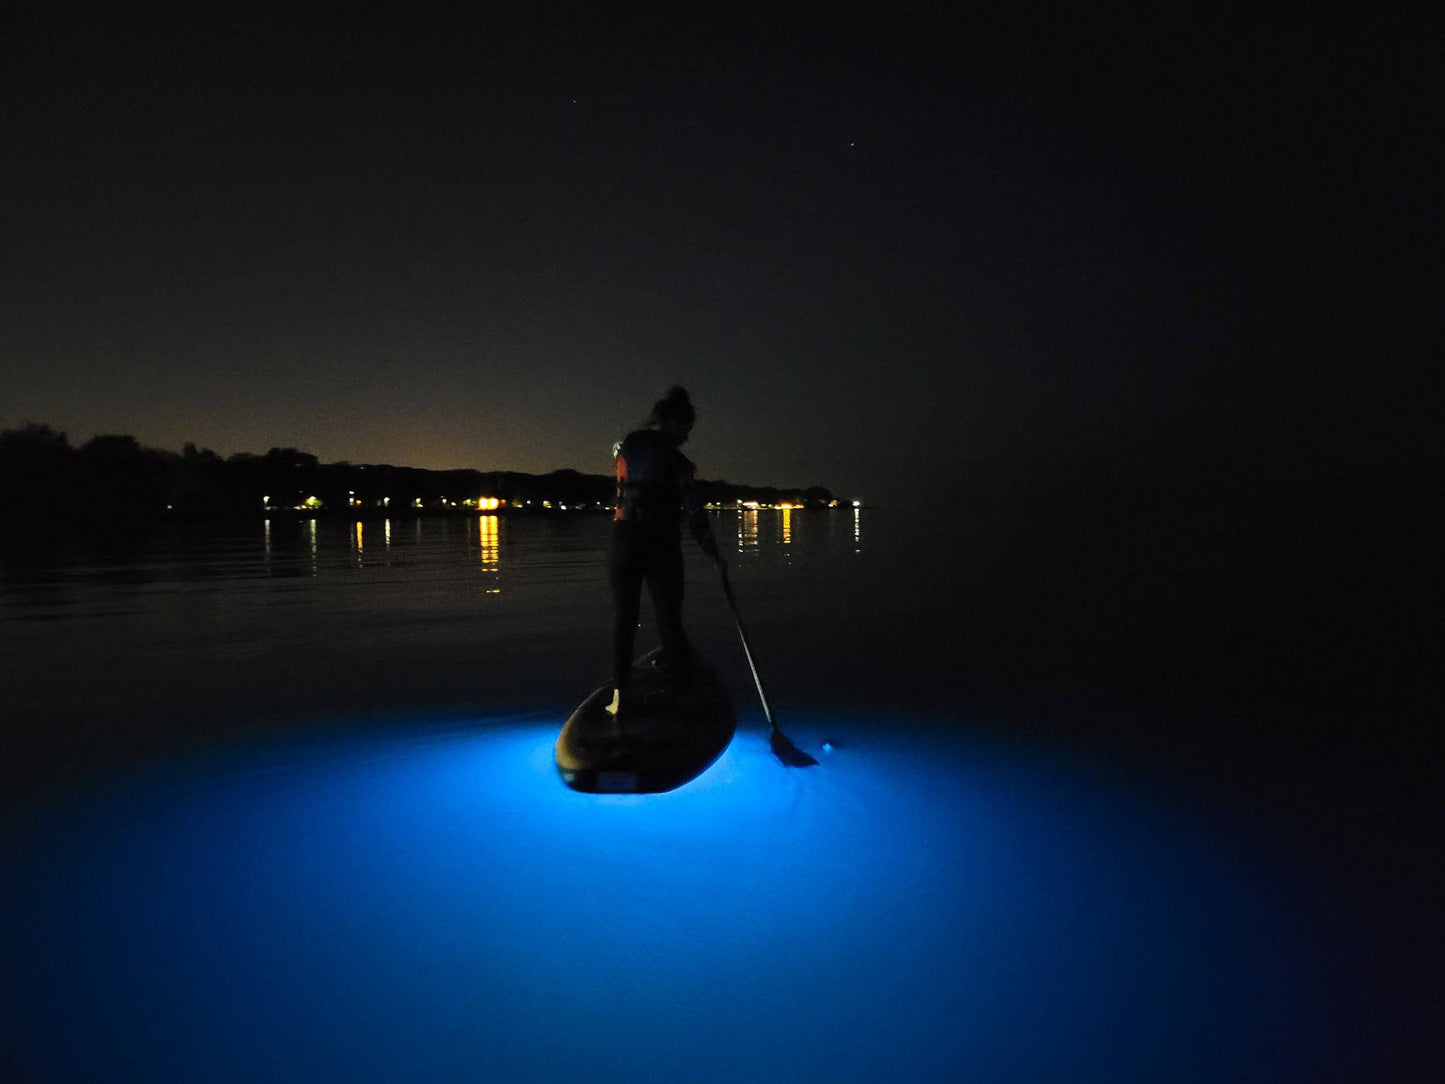 Aurora Explorer - SUBMRG. Paddle board glows in bright blue on a night SUP.